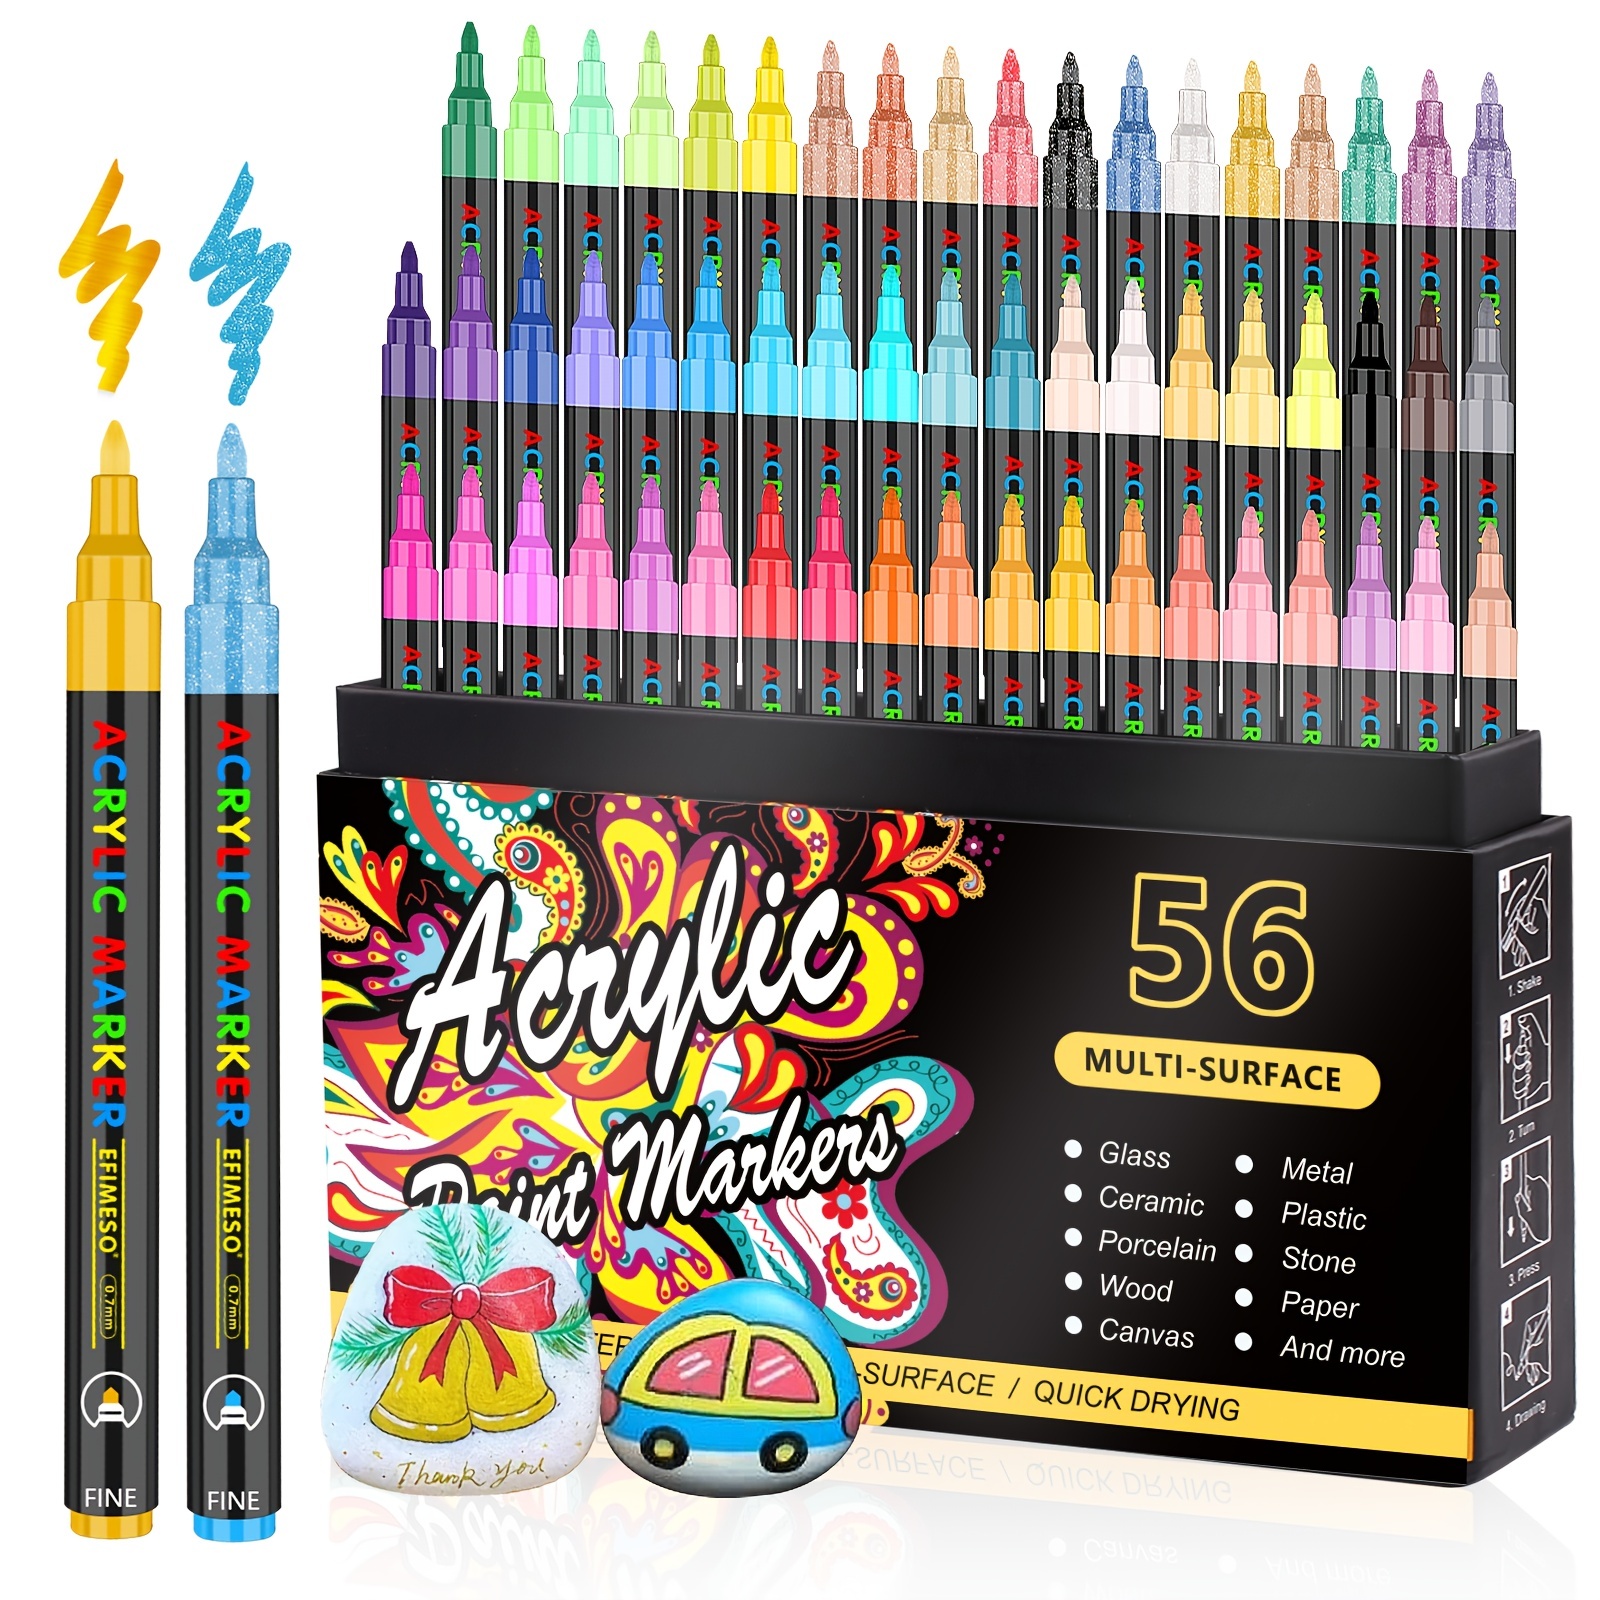 ARTISTRO Acrylic Paint Pens 24 with 2 Metallic Markers Gold & Silver Extra Fine and Medium Tip + Chisel, Paint Markers for Canvas, Metal, Rocks